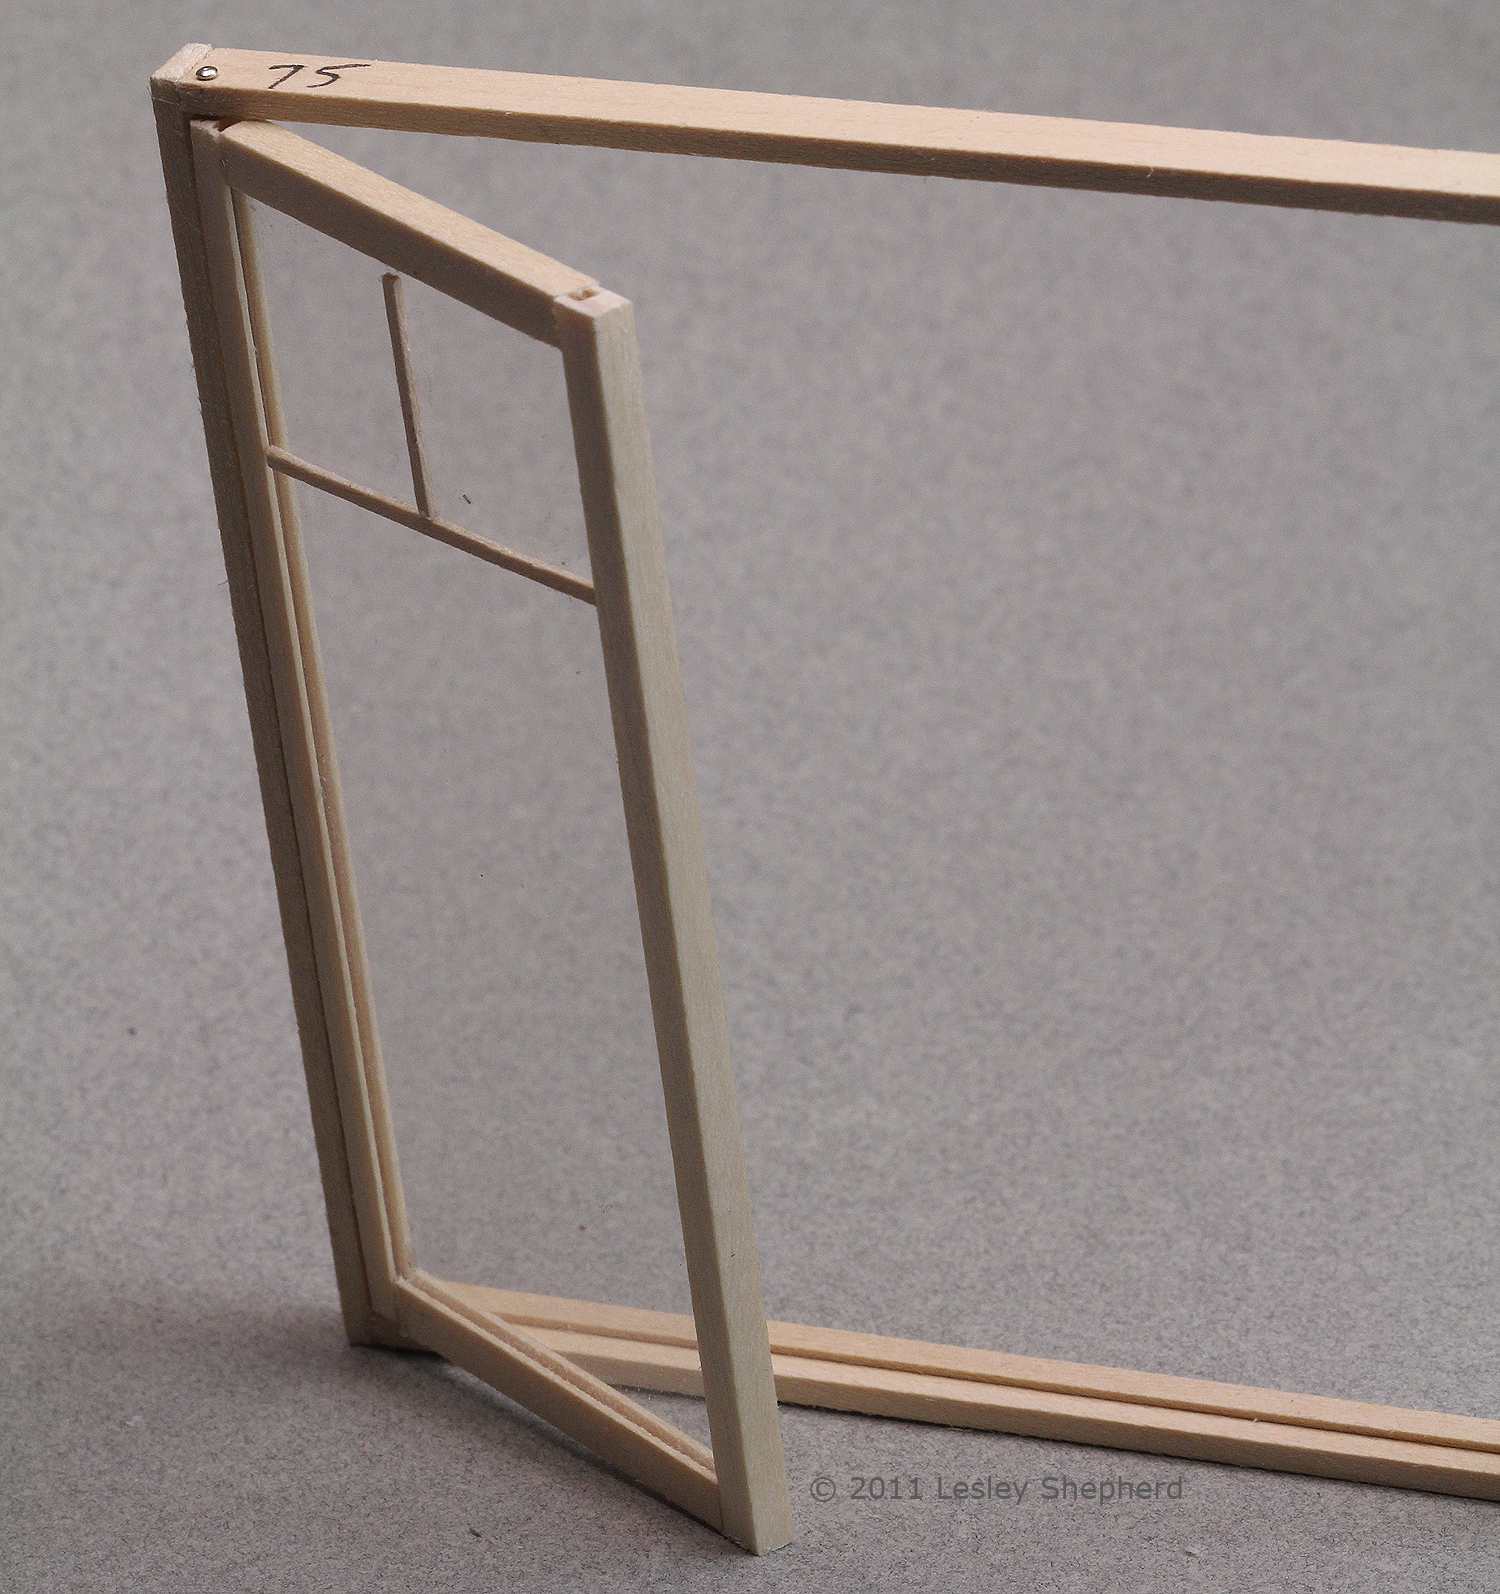 Opening casement window for a dolls house